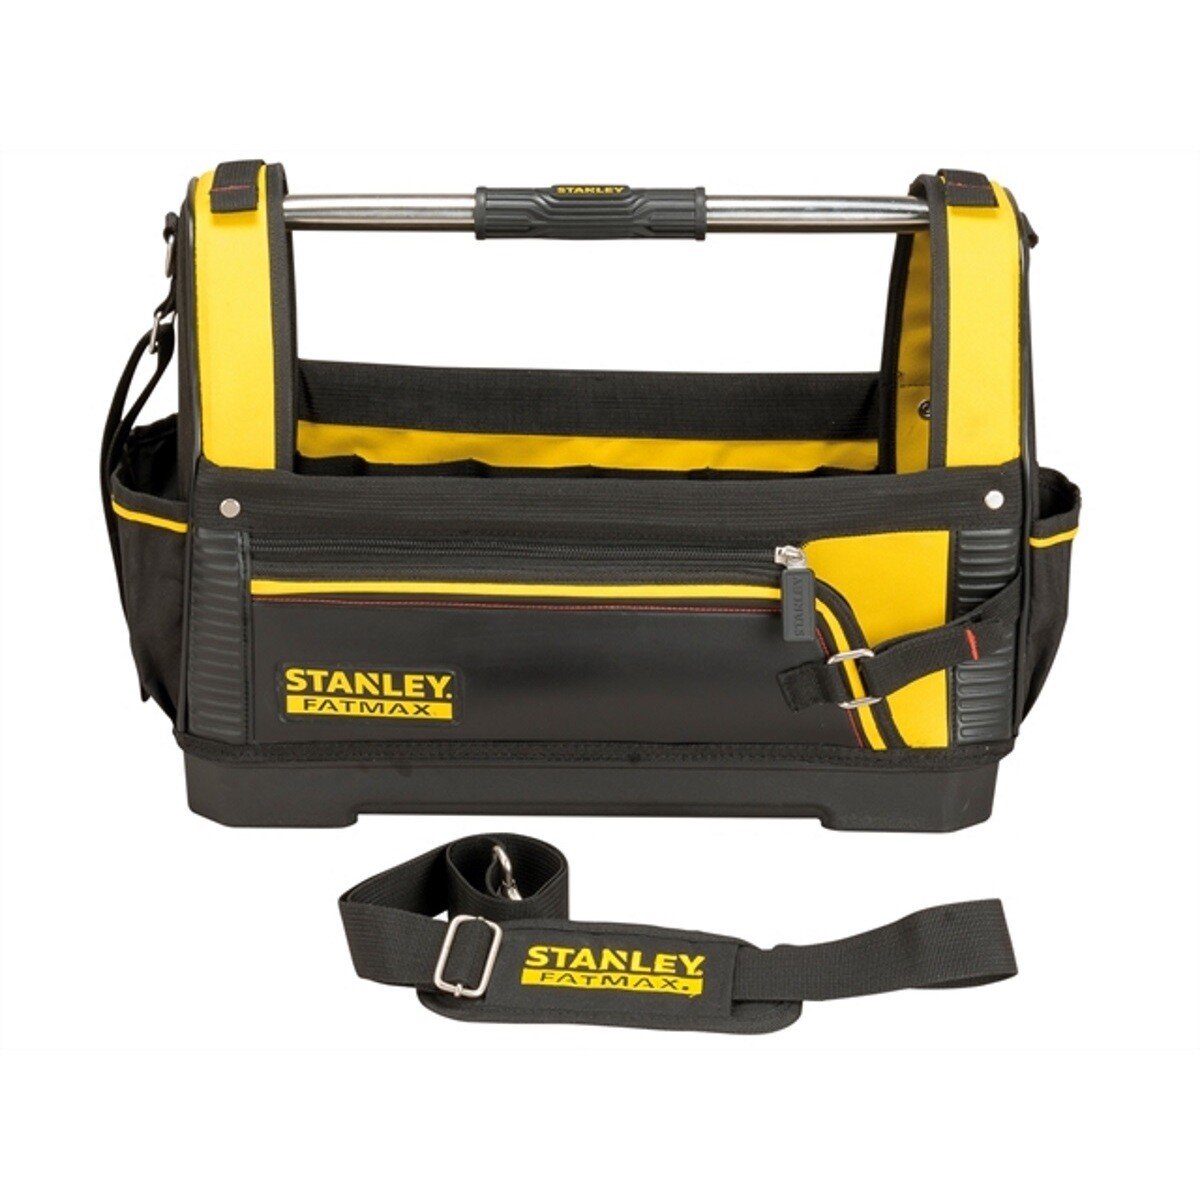 Stanley 1-93-951 FatMax® Open Tote Tool Bag STA193951 from Lawson HIS